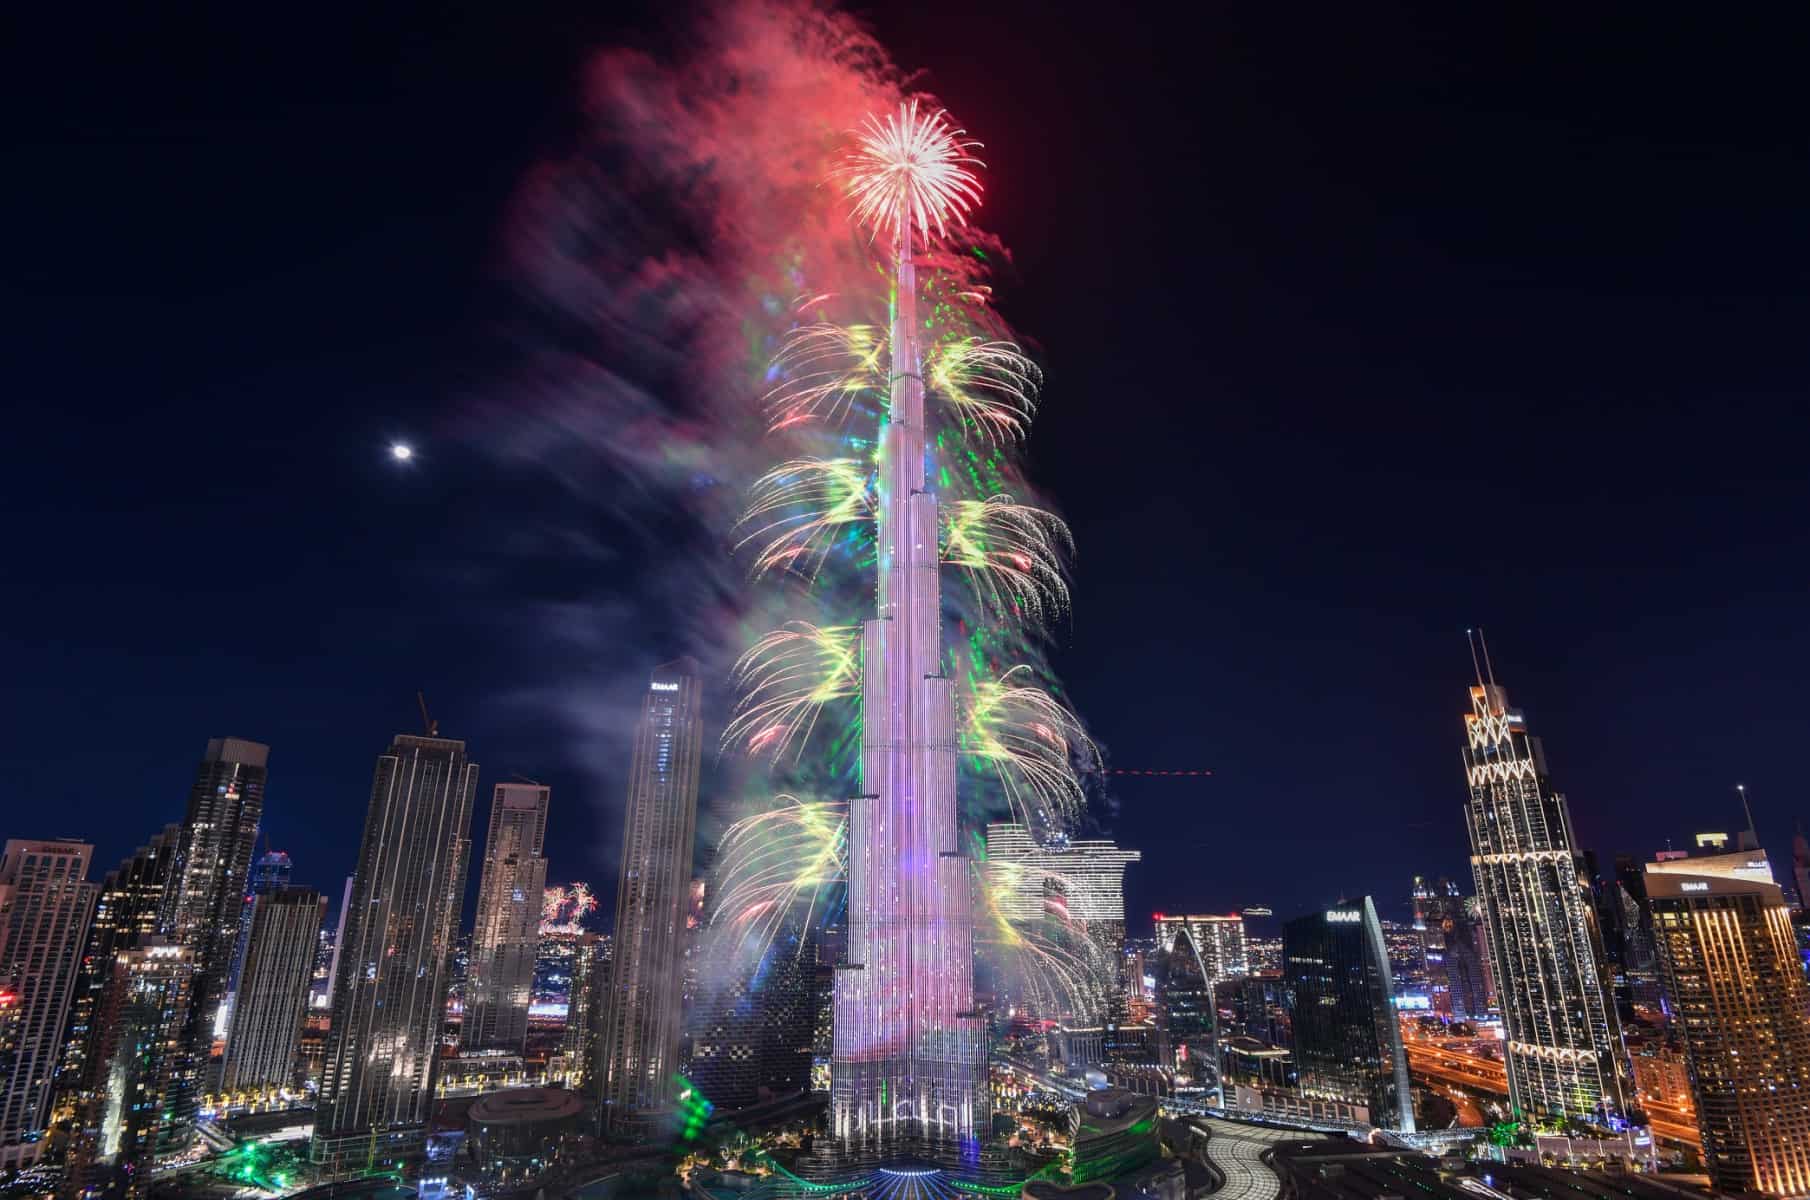 New Year 2023: World bids farewell to turbulent 2022 marked by war